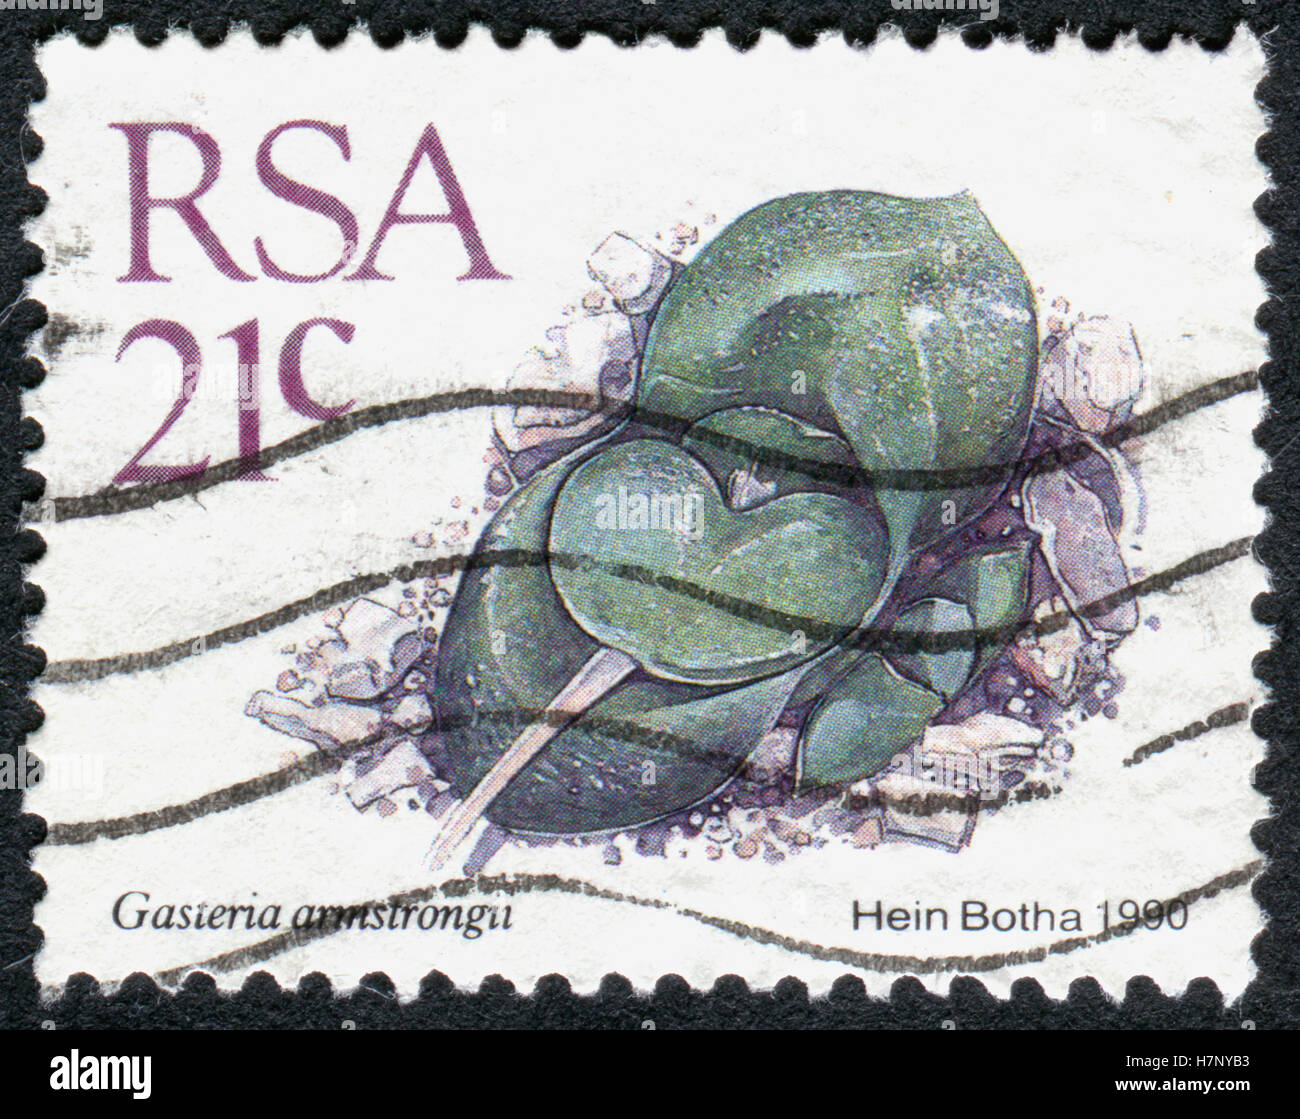 SOUTH AFRICA - CIRCA 1990: A stamp printed in South Africa, shows a dwarf succulent plant Gasteria armstrongii, circa 1990 Stock Photo